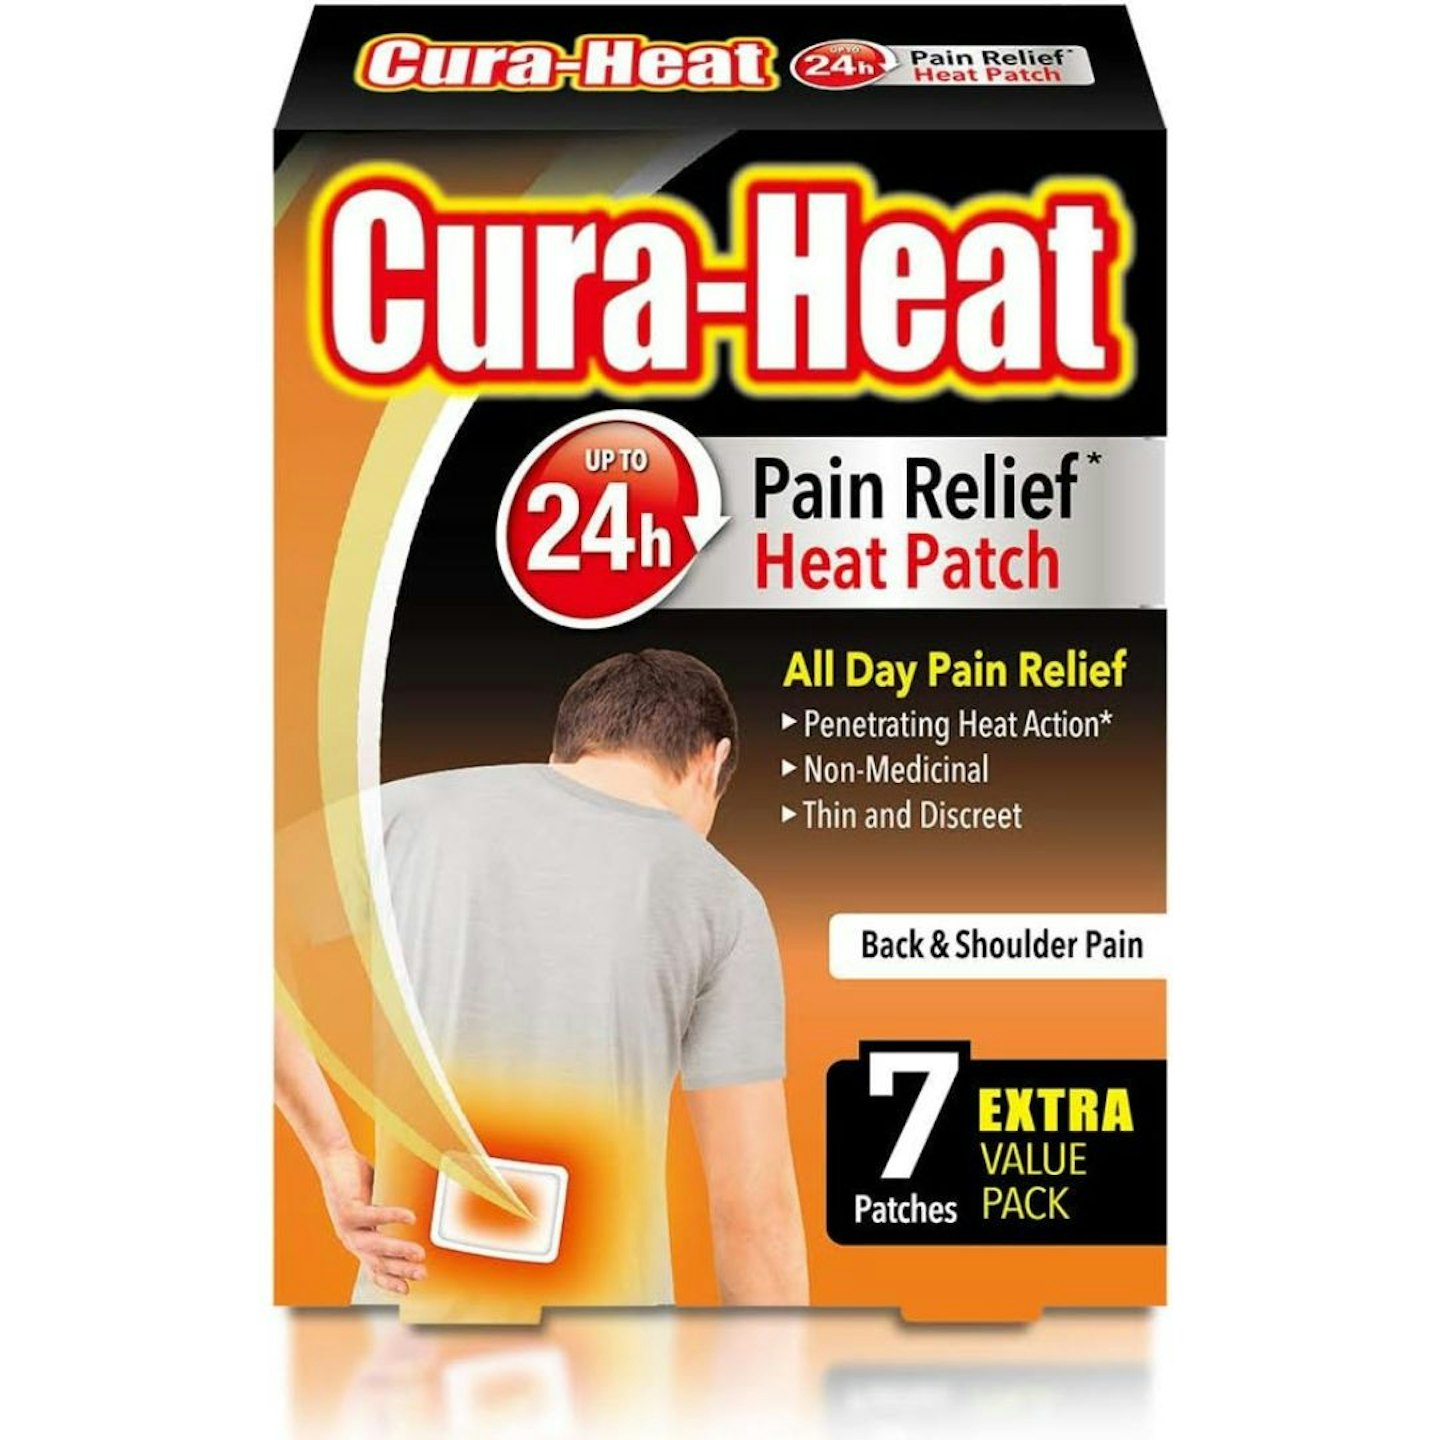 Cura-Heat Back and Shoulder Pain heat patche